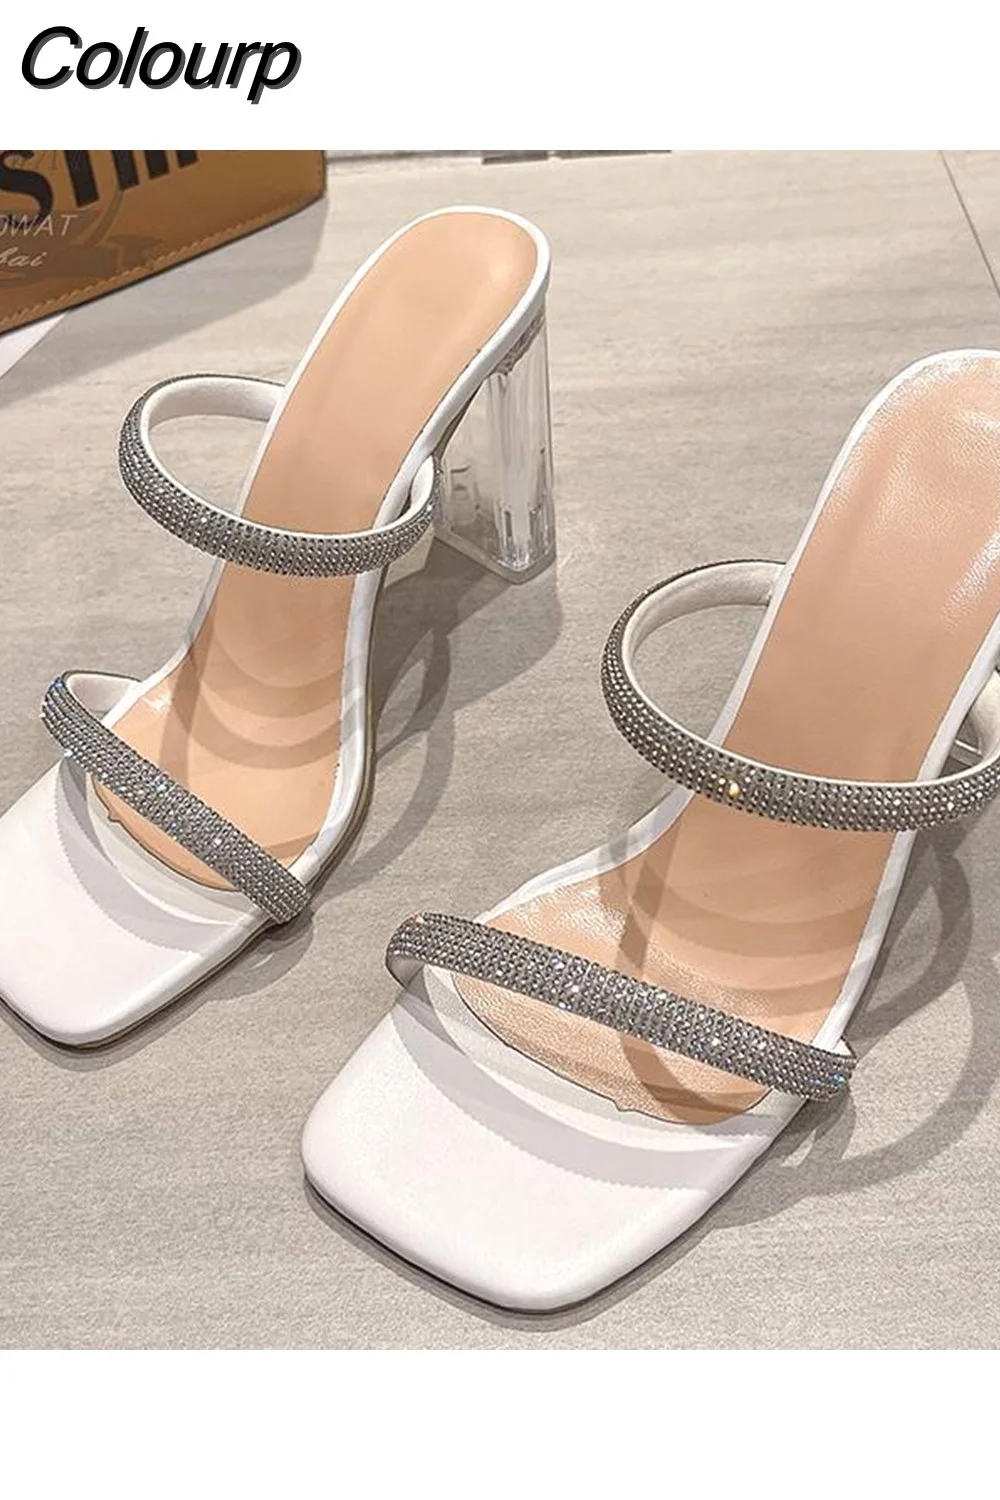 Colourp Slippers Female Shoes Fashion Rhinestone New Summer Shoes Women Party Crystal Clear Cool Mules Slide Open Toe 2023